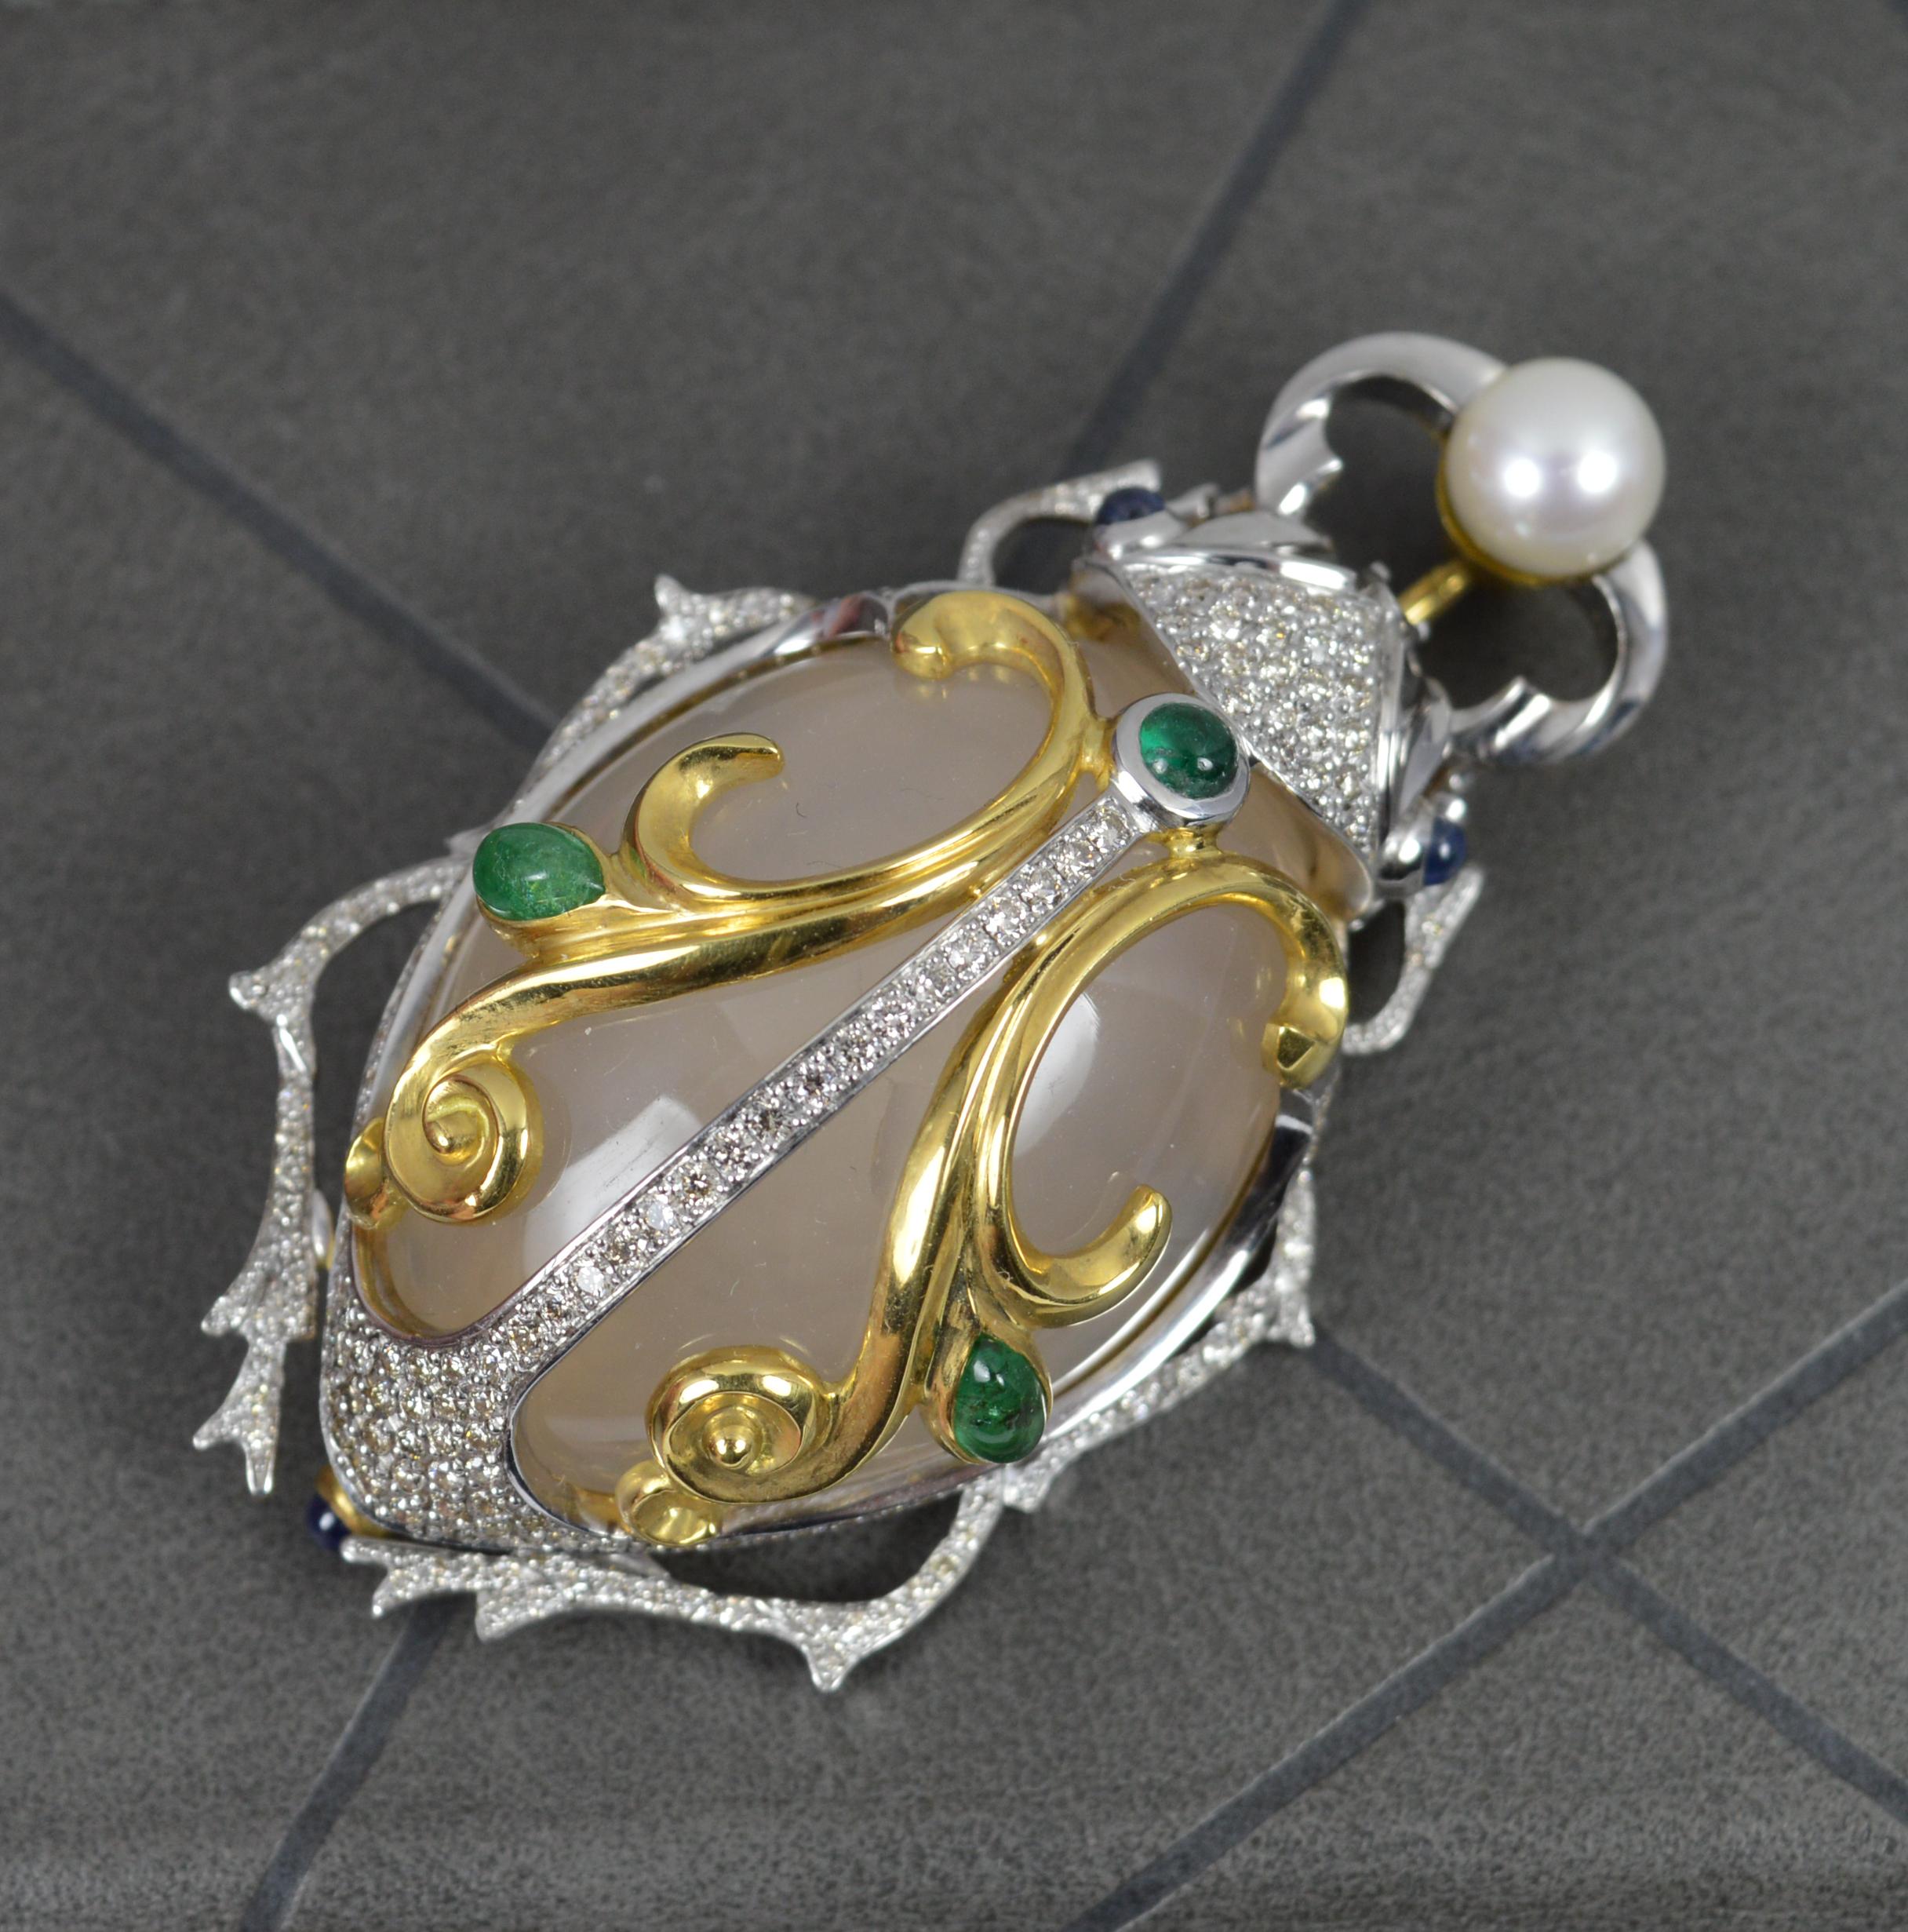 A stunning Beetle shaped brooch. 
Expertly crafted example.
Solid 18 carat yellow and white gold 
Designed with a pearl to top. The head, body and legs all pave set with many round brilliant cut, vs clarity diamonds, over 2cts. 
Complete with